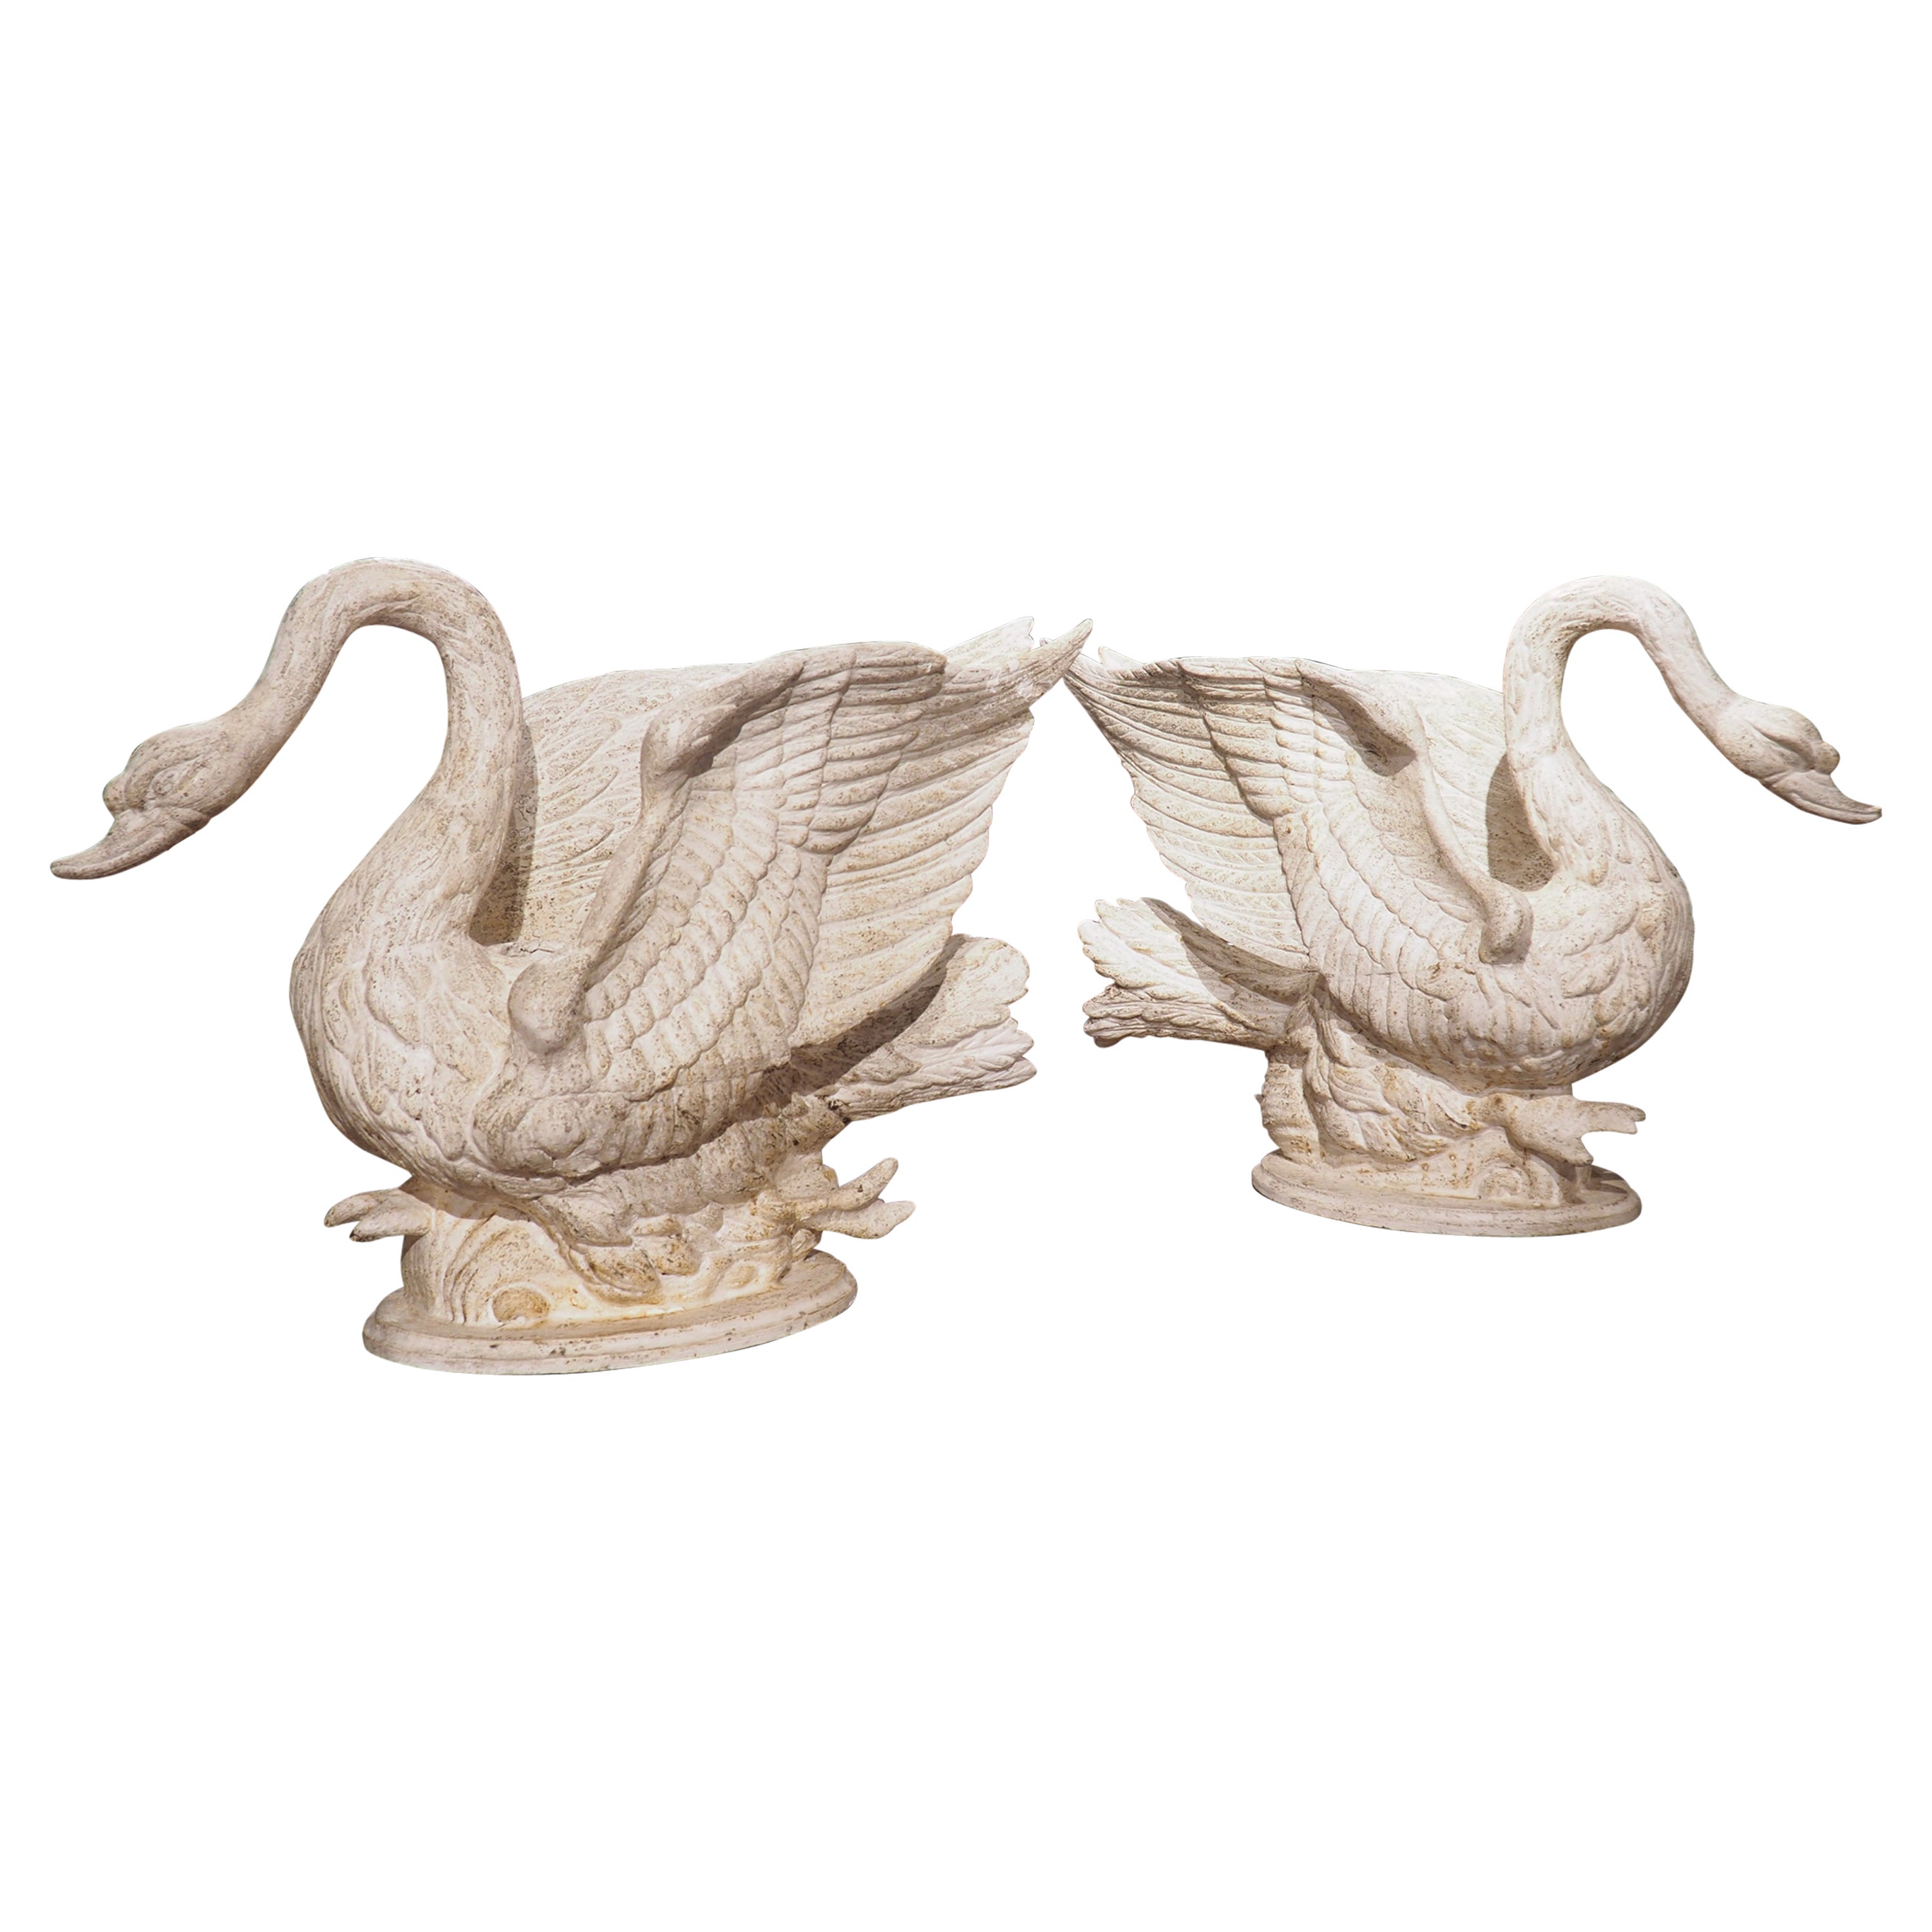 Pair of Large Carved and Painted Wooden Swan Planters from Italy